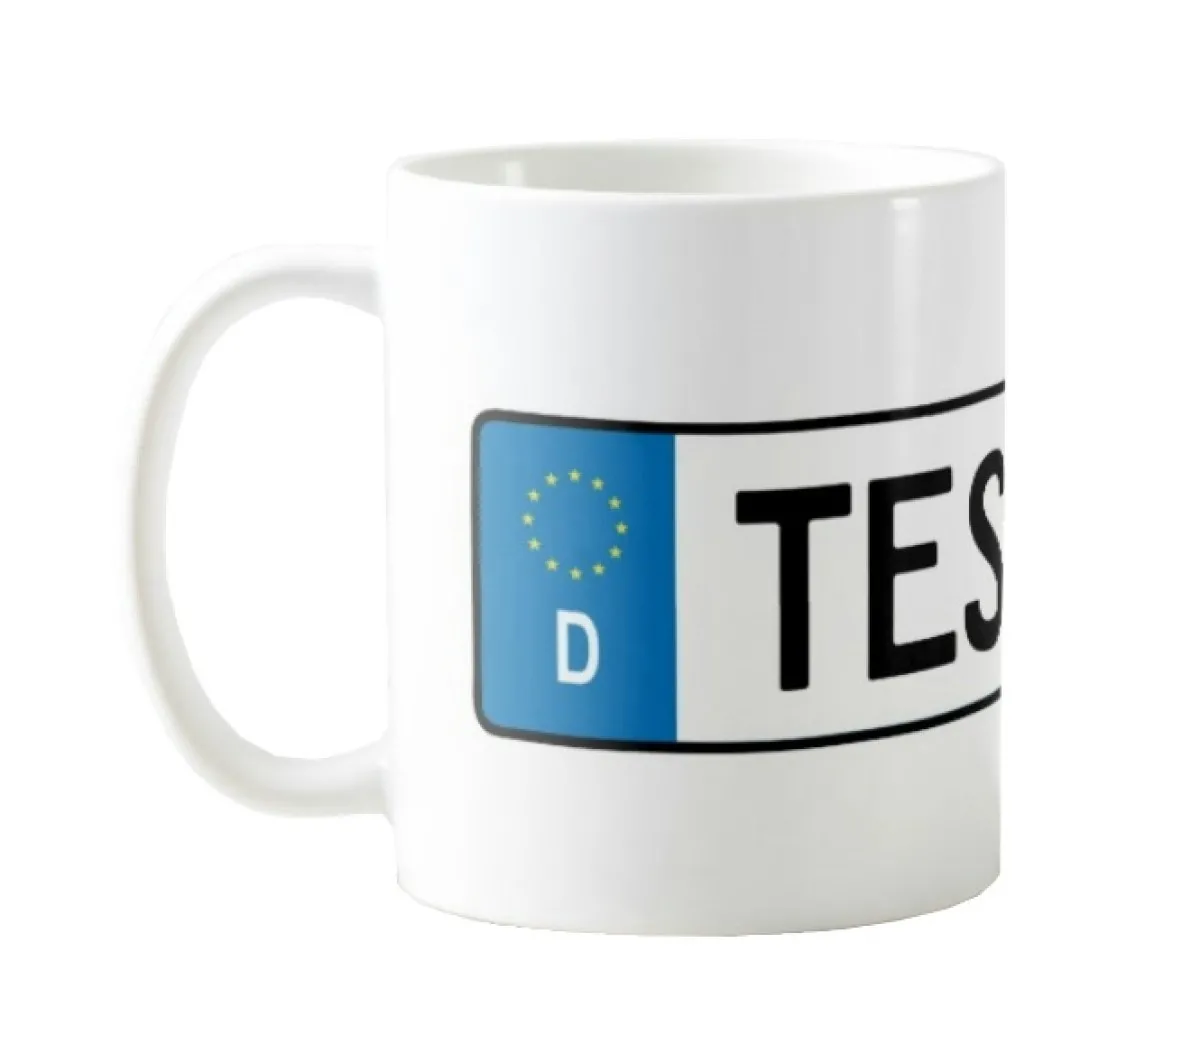 Mug with car licence plate number